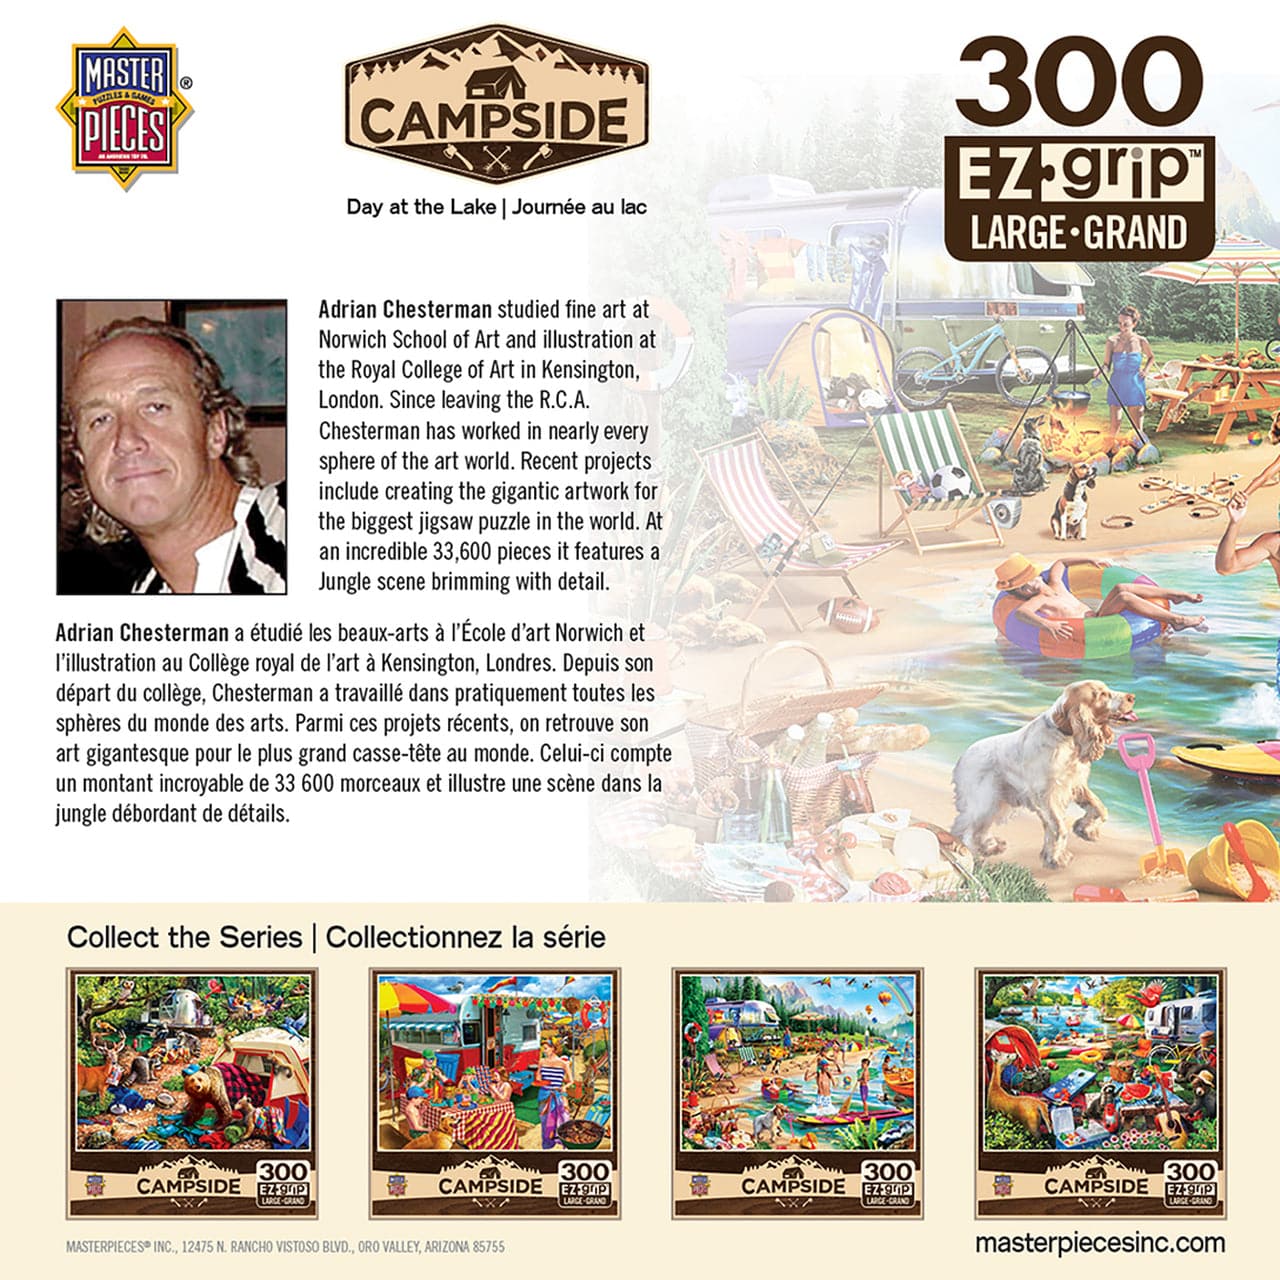 MasterPieces-Campside - Day at the Lake - 300 Piece Puzzle-31999-Legacy Toys